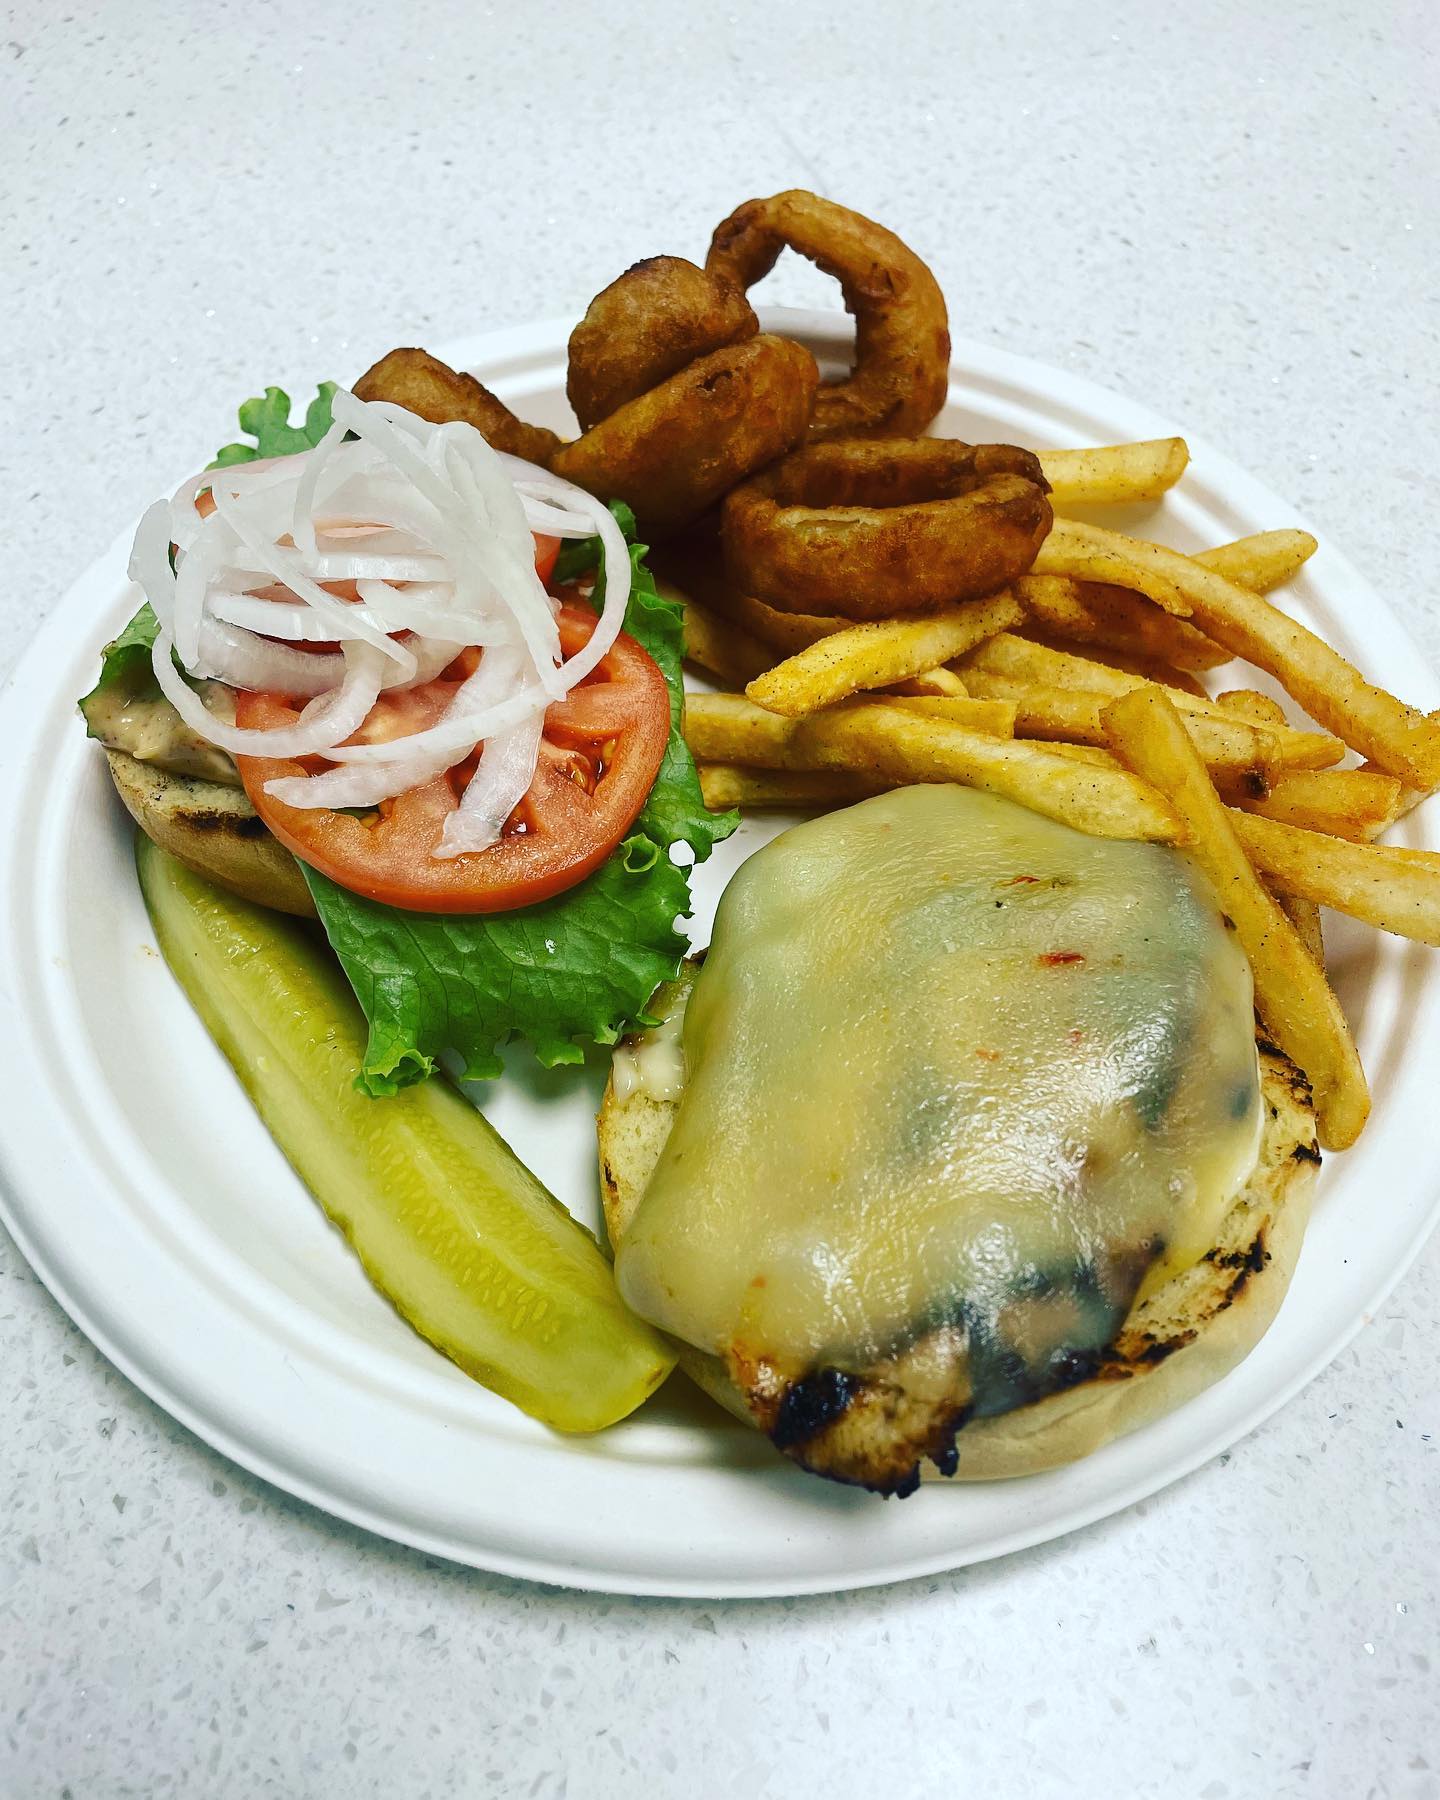 🔔🔔🔔 lunch is ready! Stop by Brady Market to grab our special marinated grilled chicken breast with pepper Jack and a special Mayo!

We’ve also got Broccoli and cheese stuffed chicken, pulled pork sandwiches, Mediterranean salmon, rice and brussel sprouts!